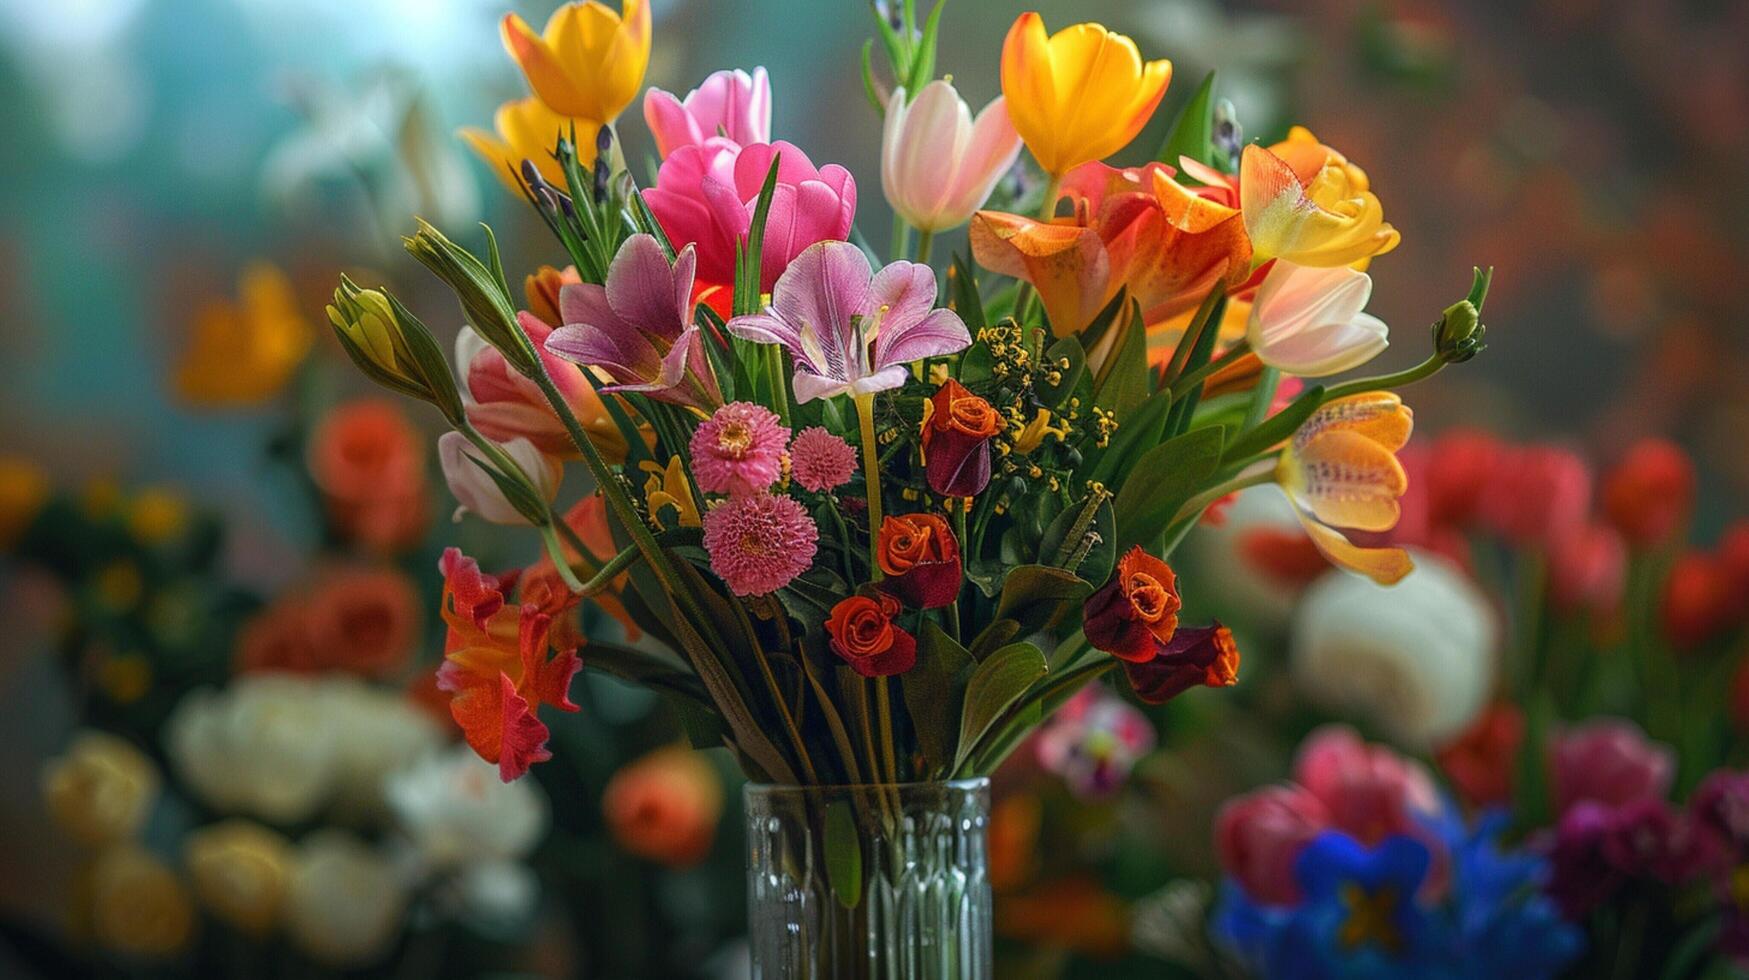 a fresh bouquet of multi colored flowers photo